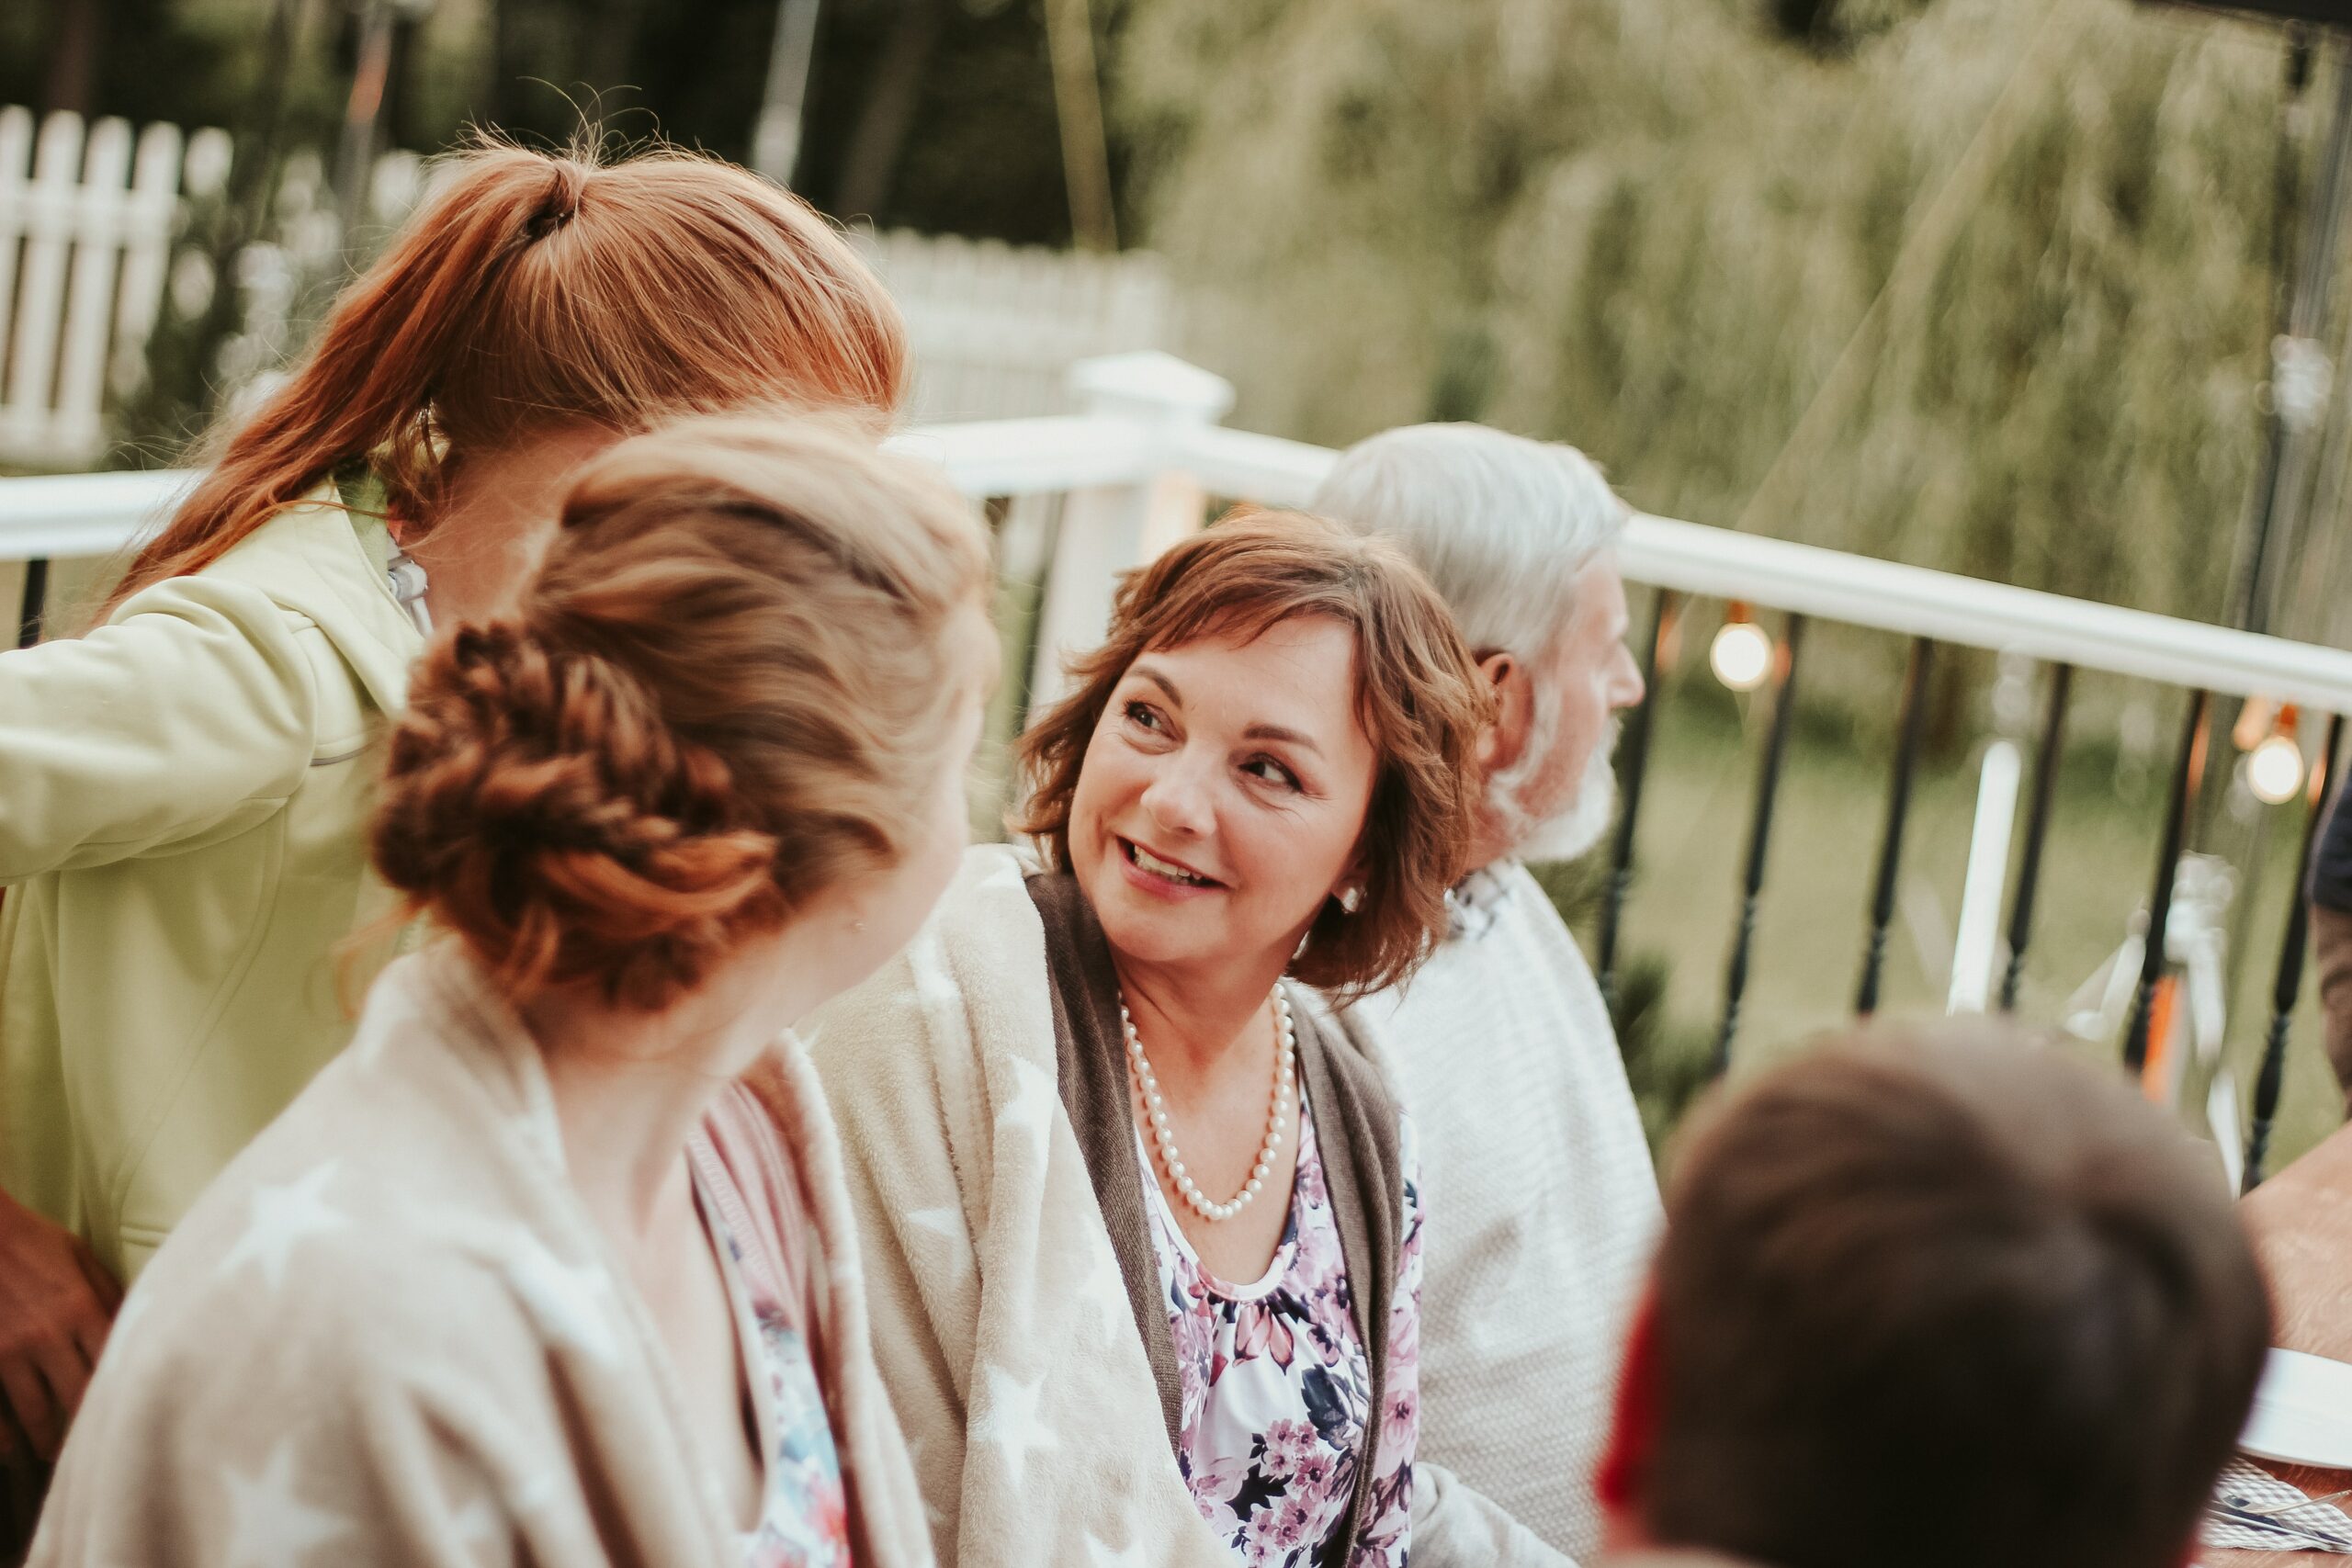 Smiling woman surrounded by her family helping her to cope with stressful life transitions.